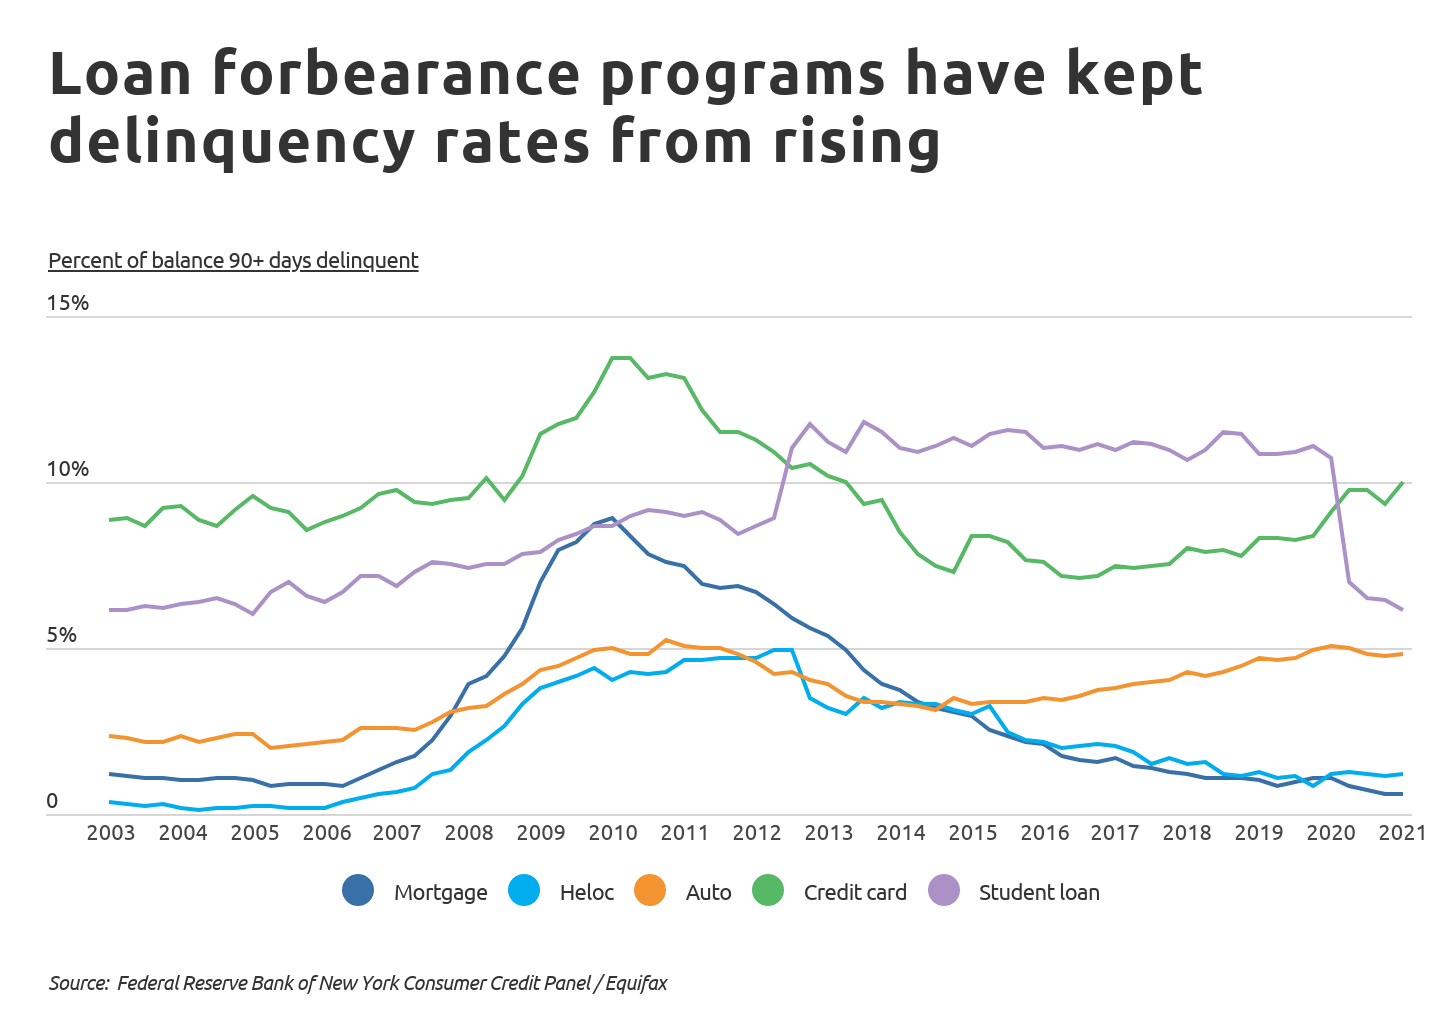 Loan forbearance programs have kept delinquency rates from rising